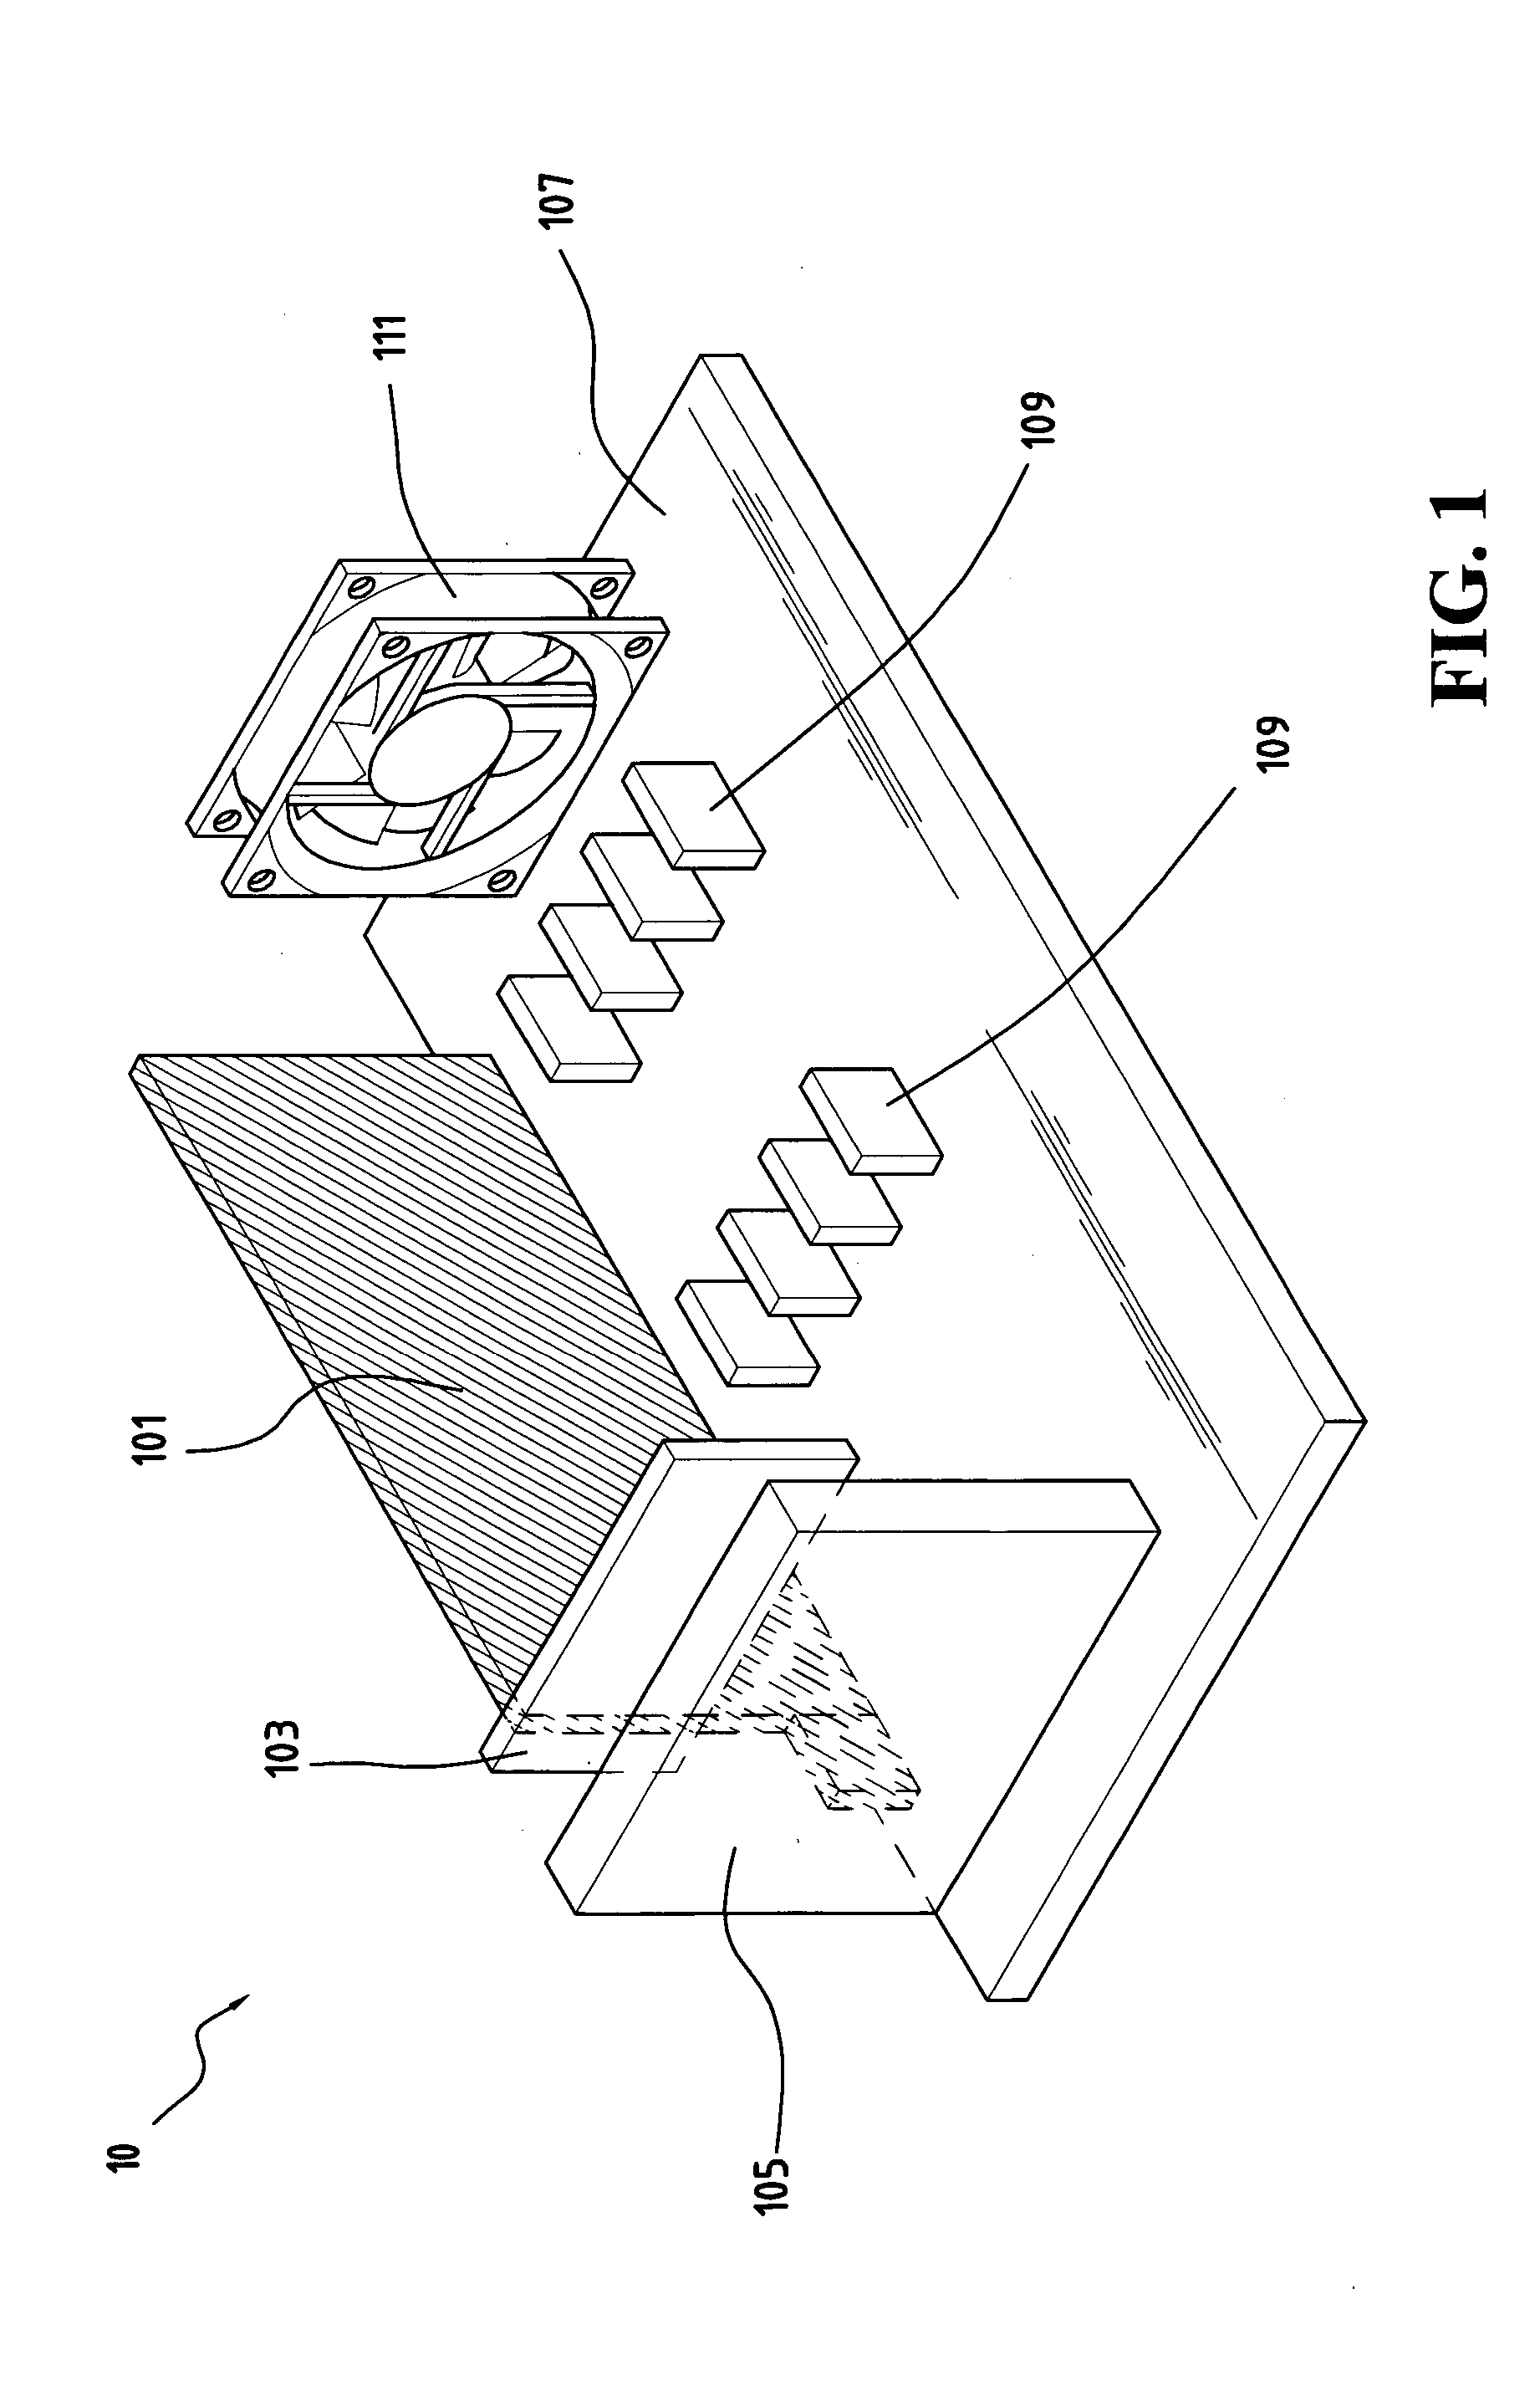 Assembly structure of clustering fuel cell